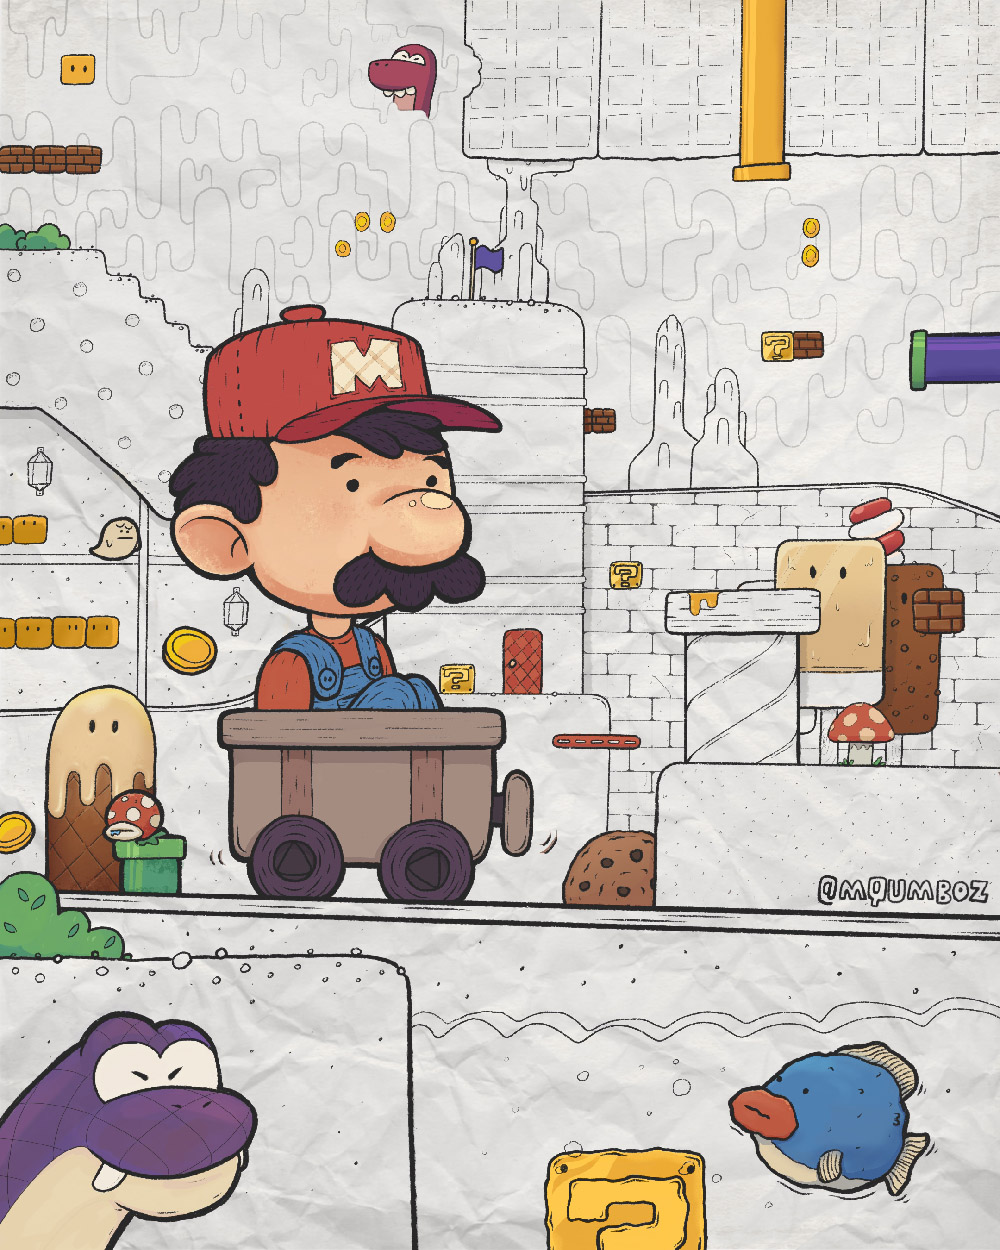 Nintendo's super mario in a cart going in caves.